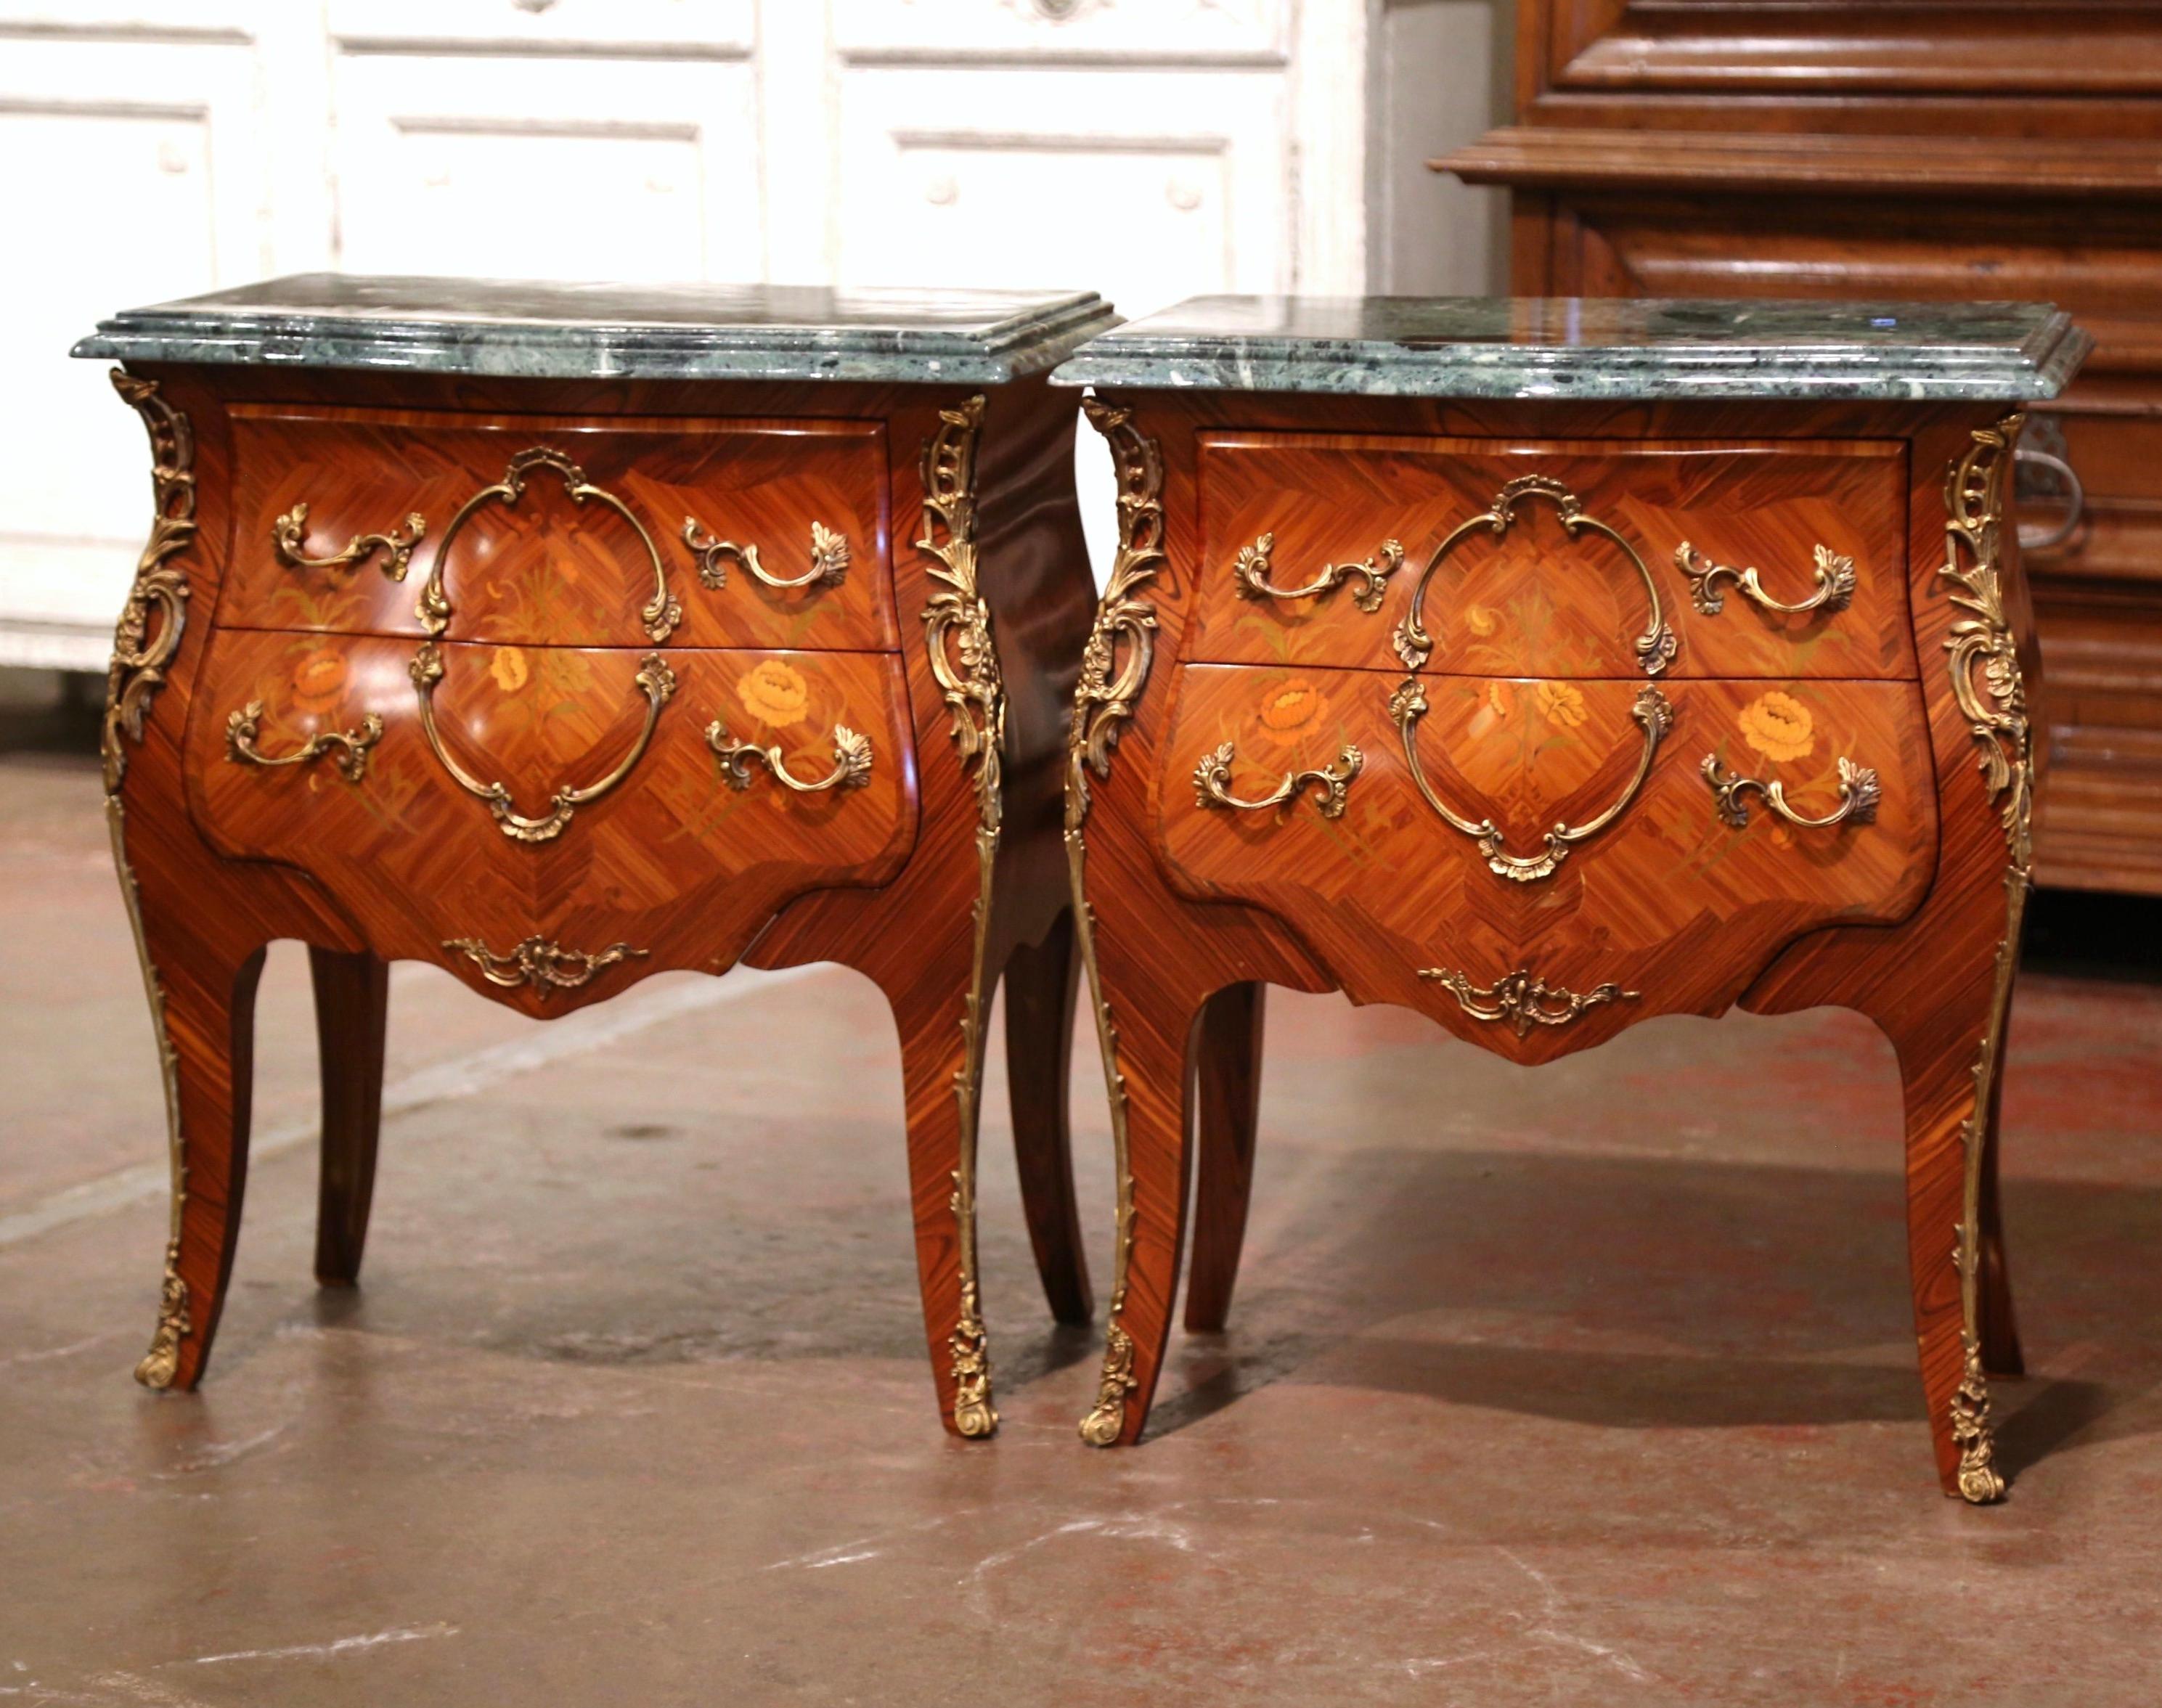 These elegant two-drawer bedside tables were created in France, circa 1980. Bombe in shape on all three sides, the petite chests stand on cabriole legs ending with bronze sabot feet decorated with acanthus leaves over a scalloped apron embellished